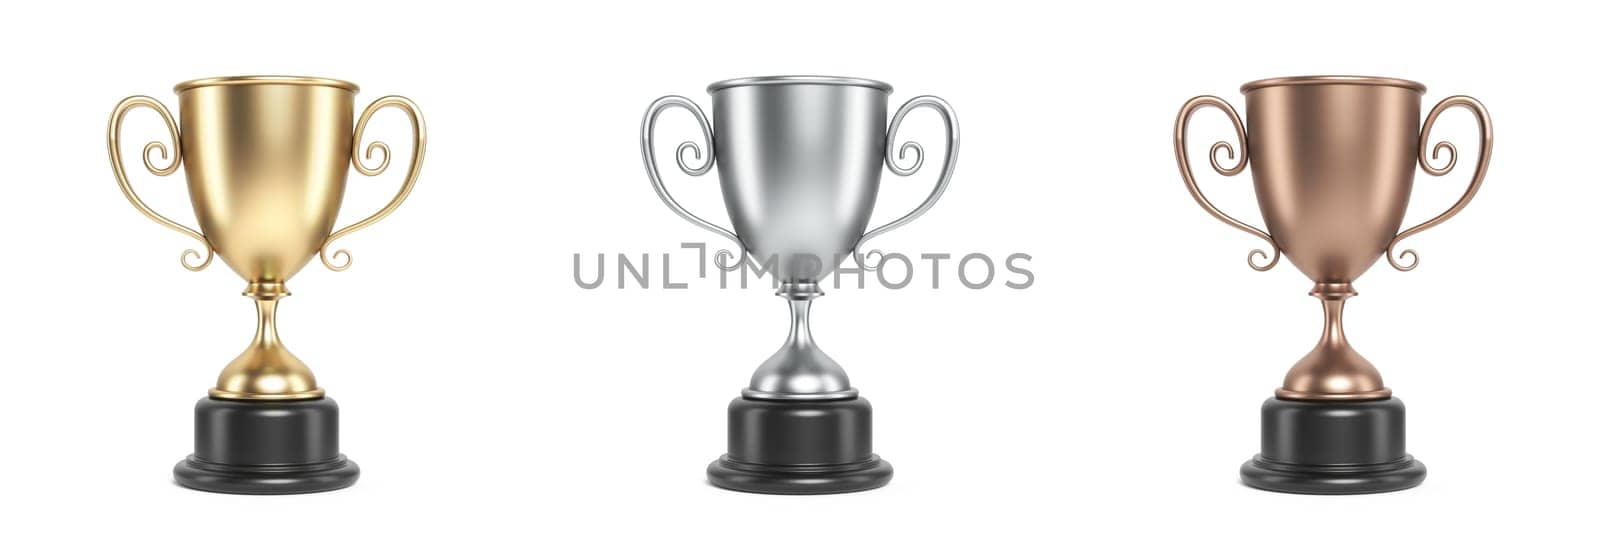 Golden, silver and bronze trophy 3D rendering illustration isolated on white background